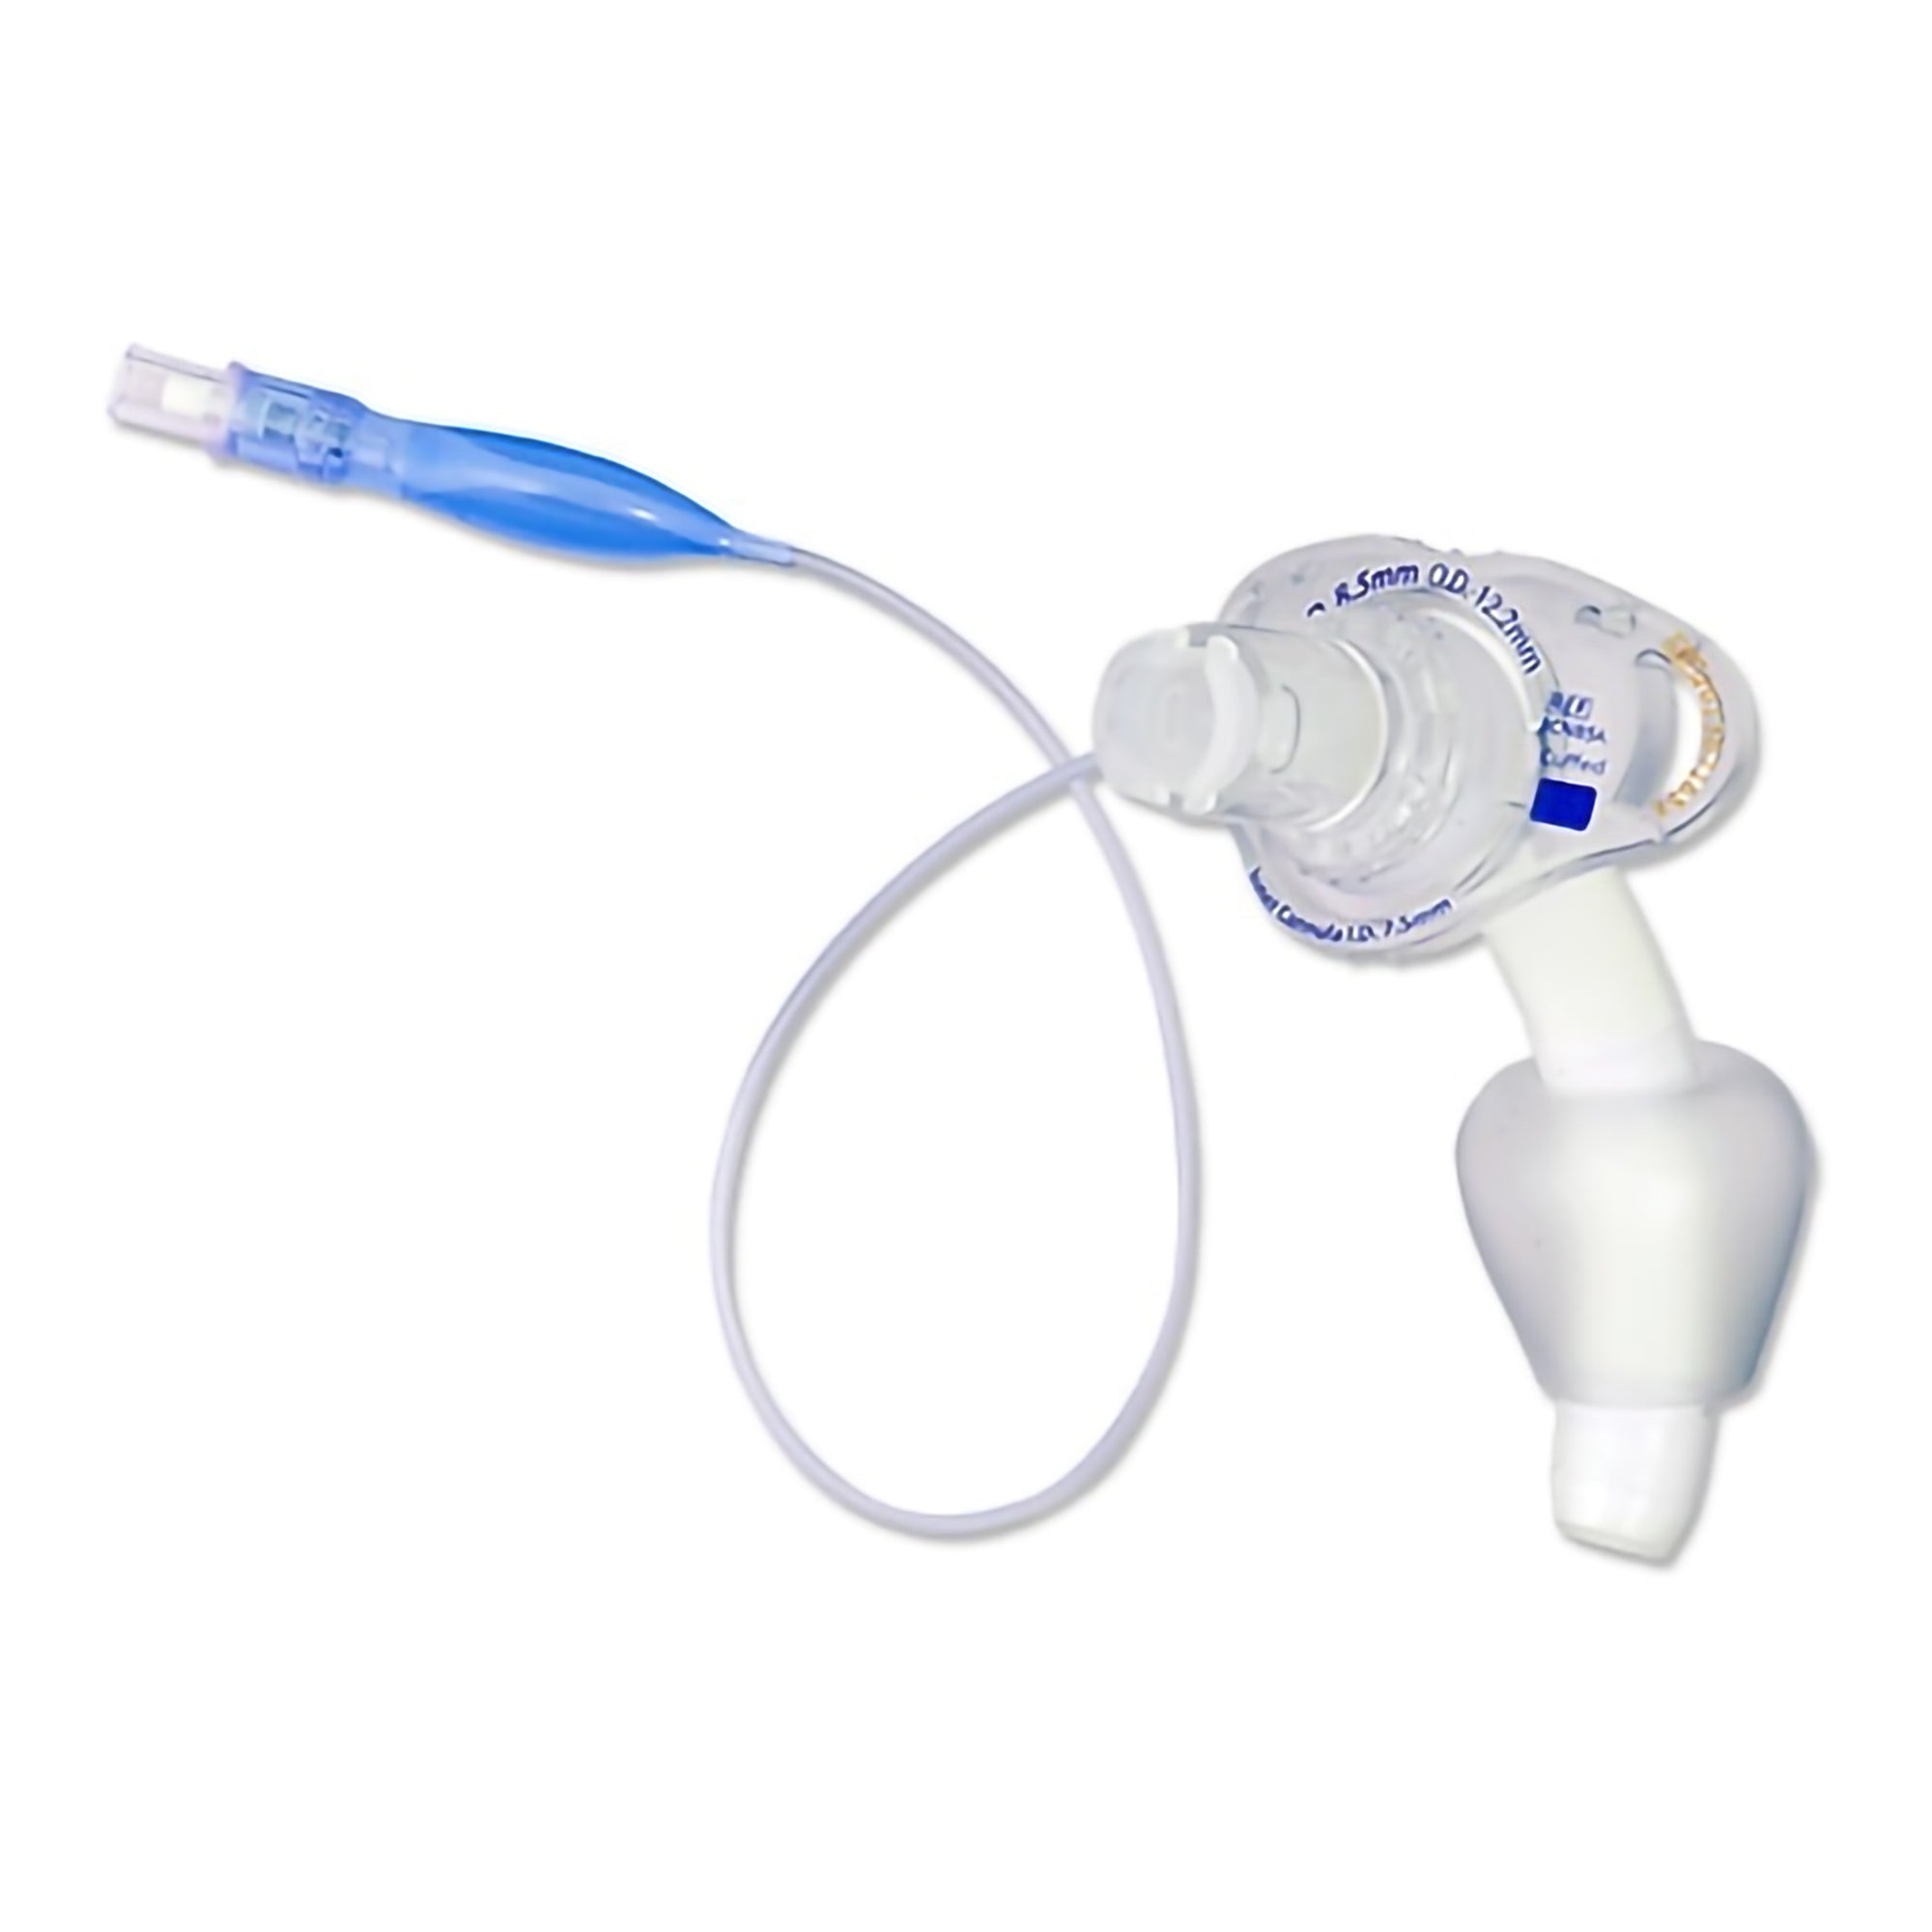 Shiley 5IC70 Disposable Inner Cannula for Tracheostomy Tubes - 7.0mm ID - Single Patient Use